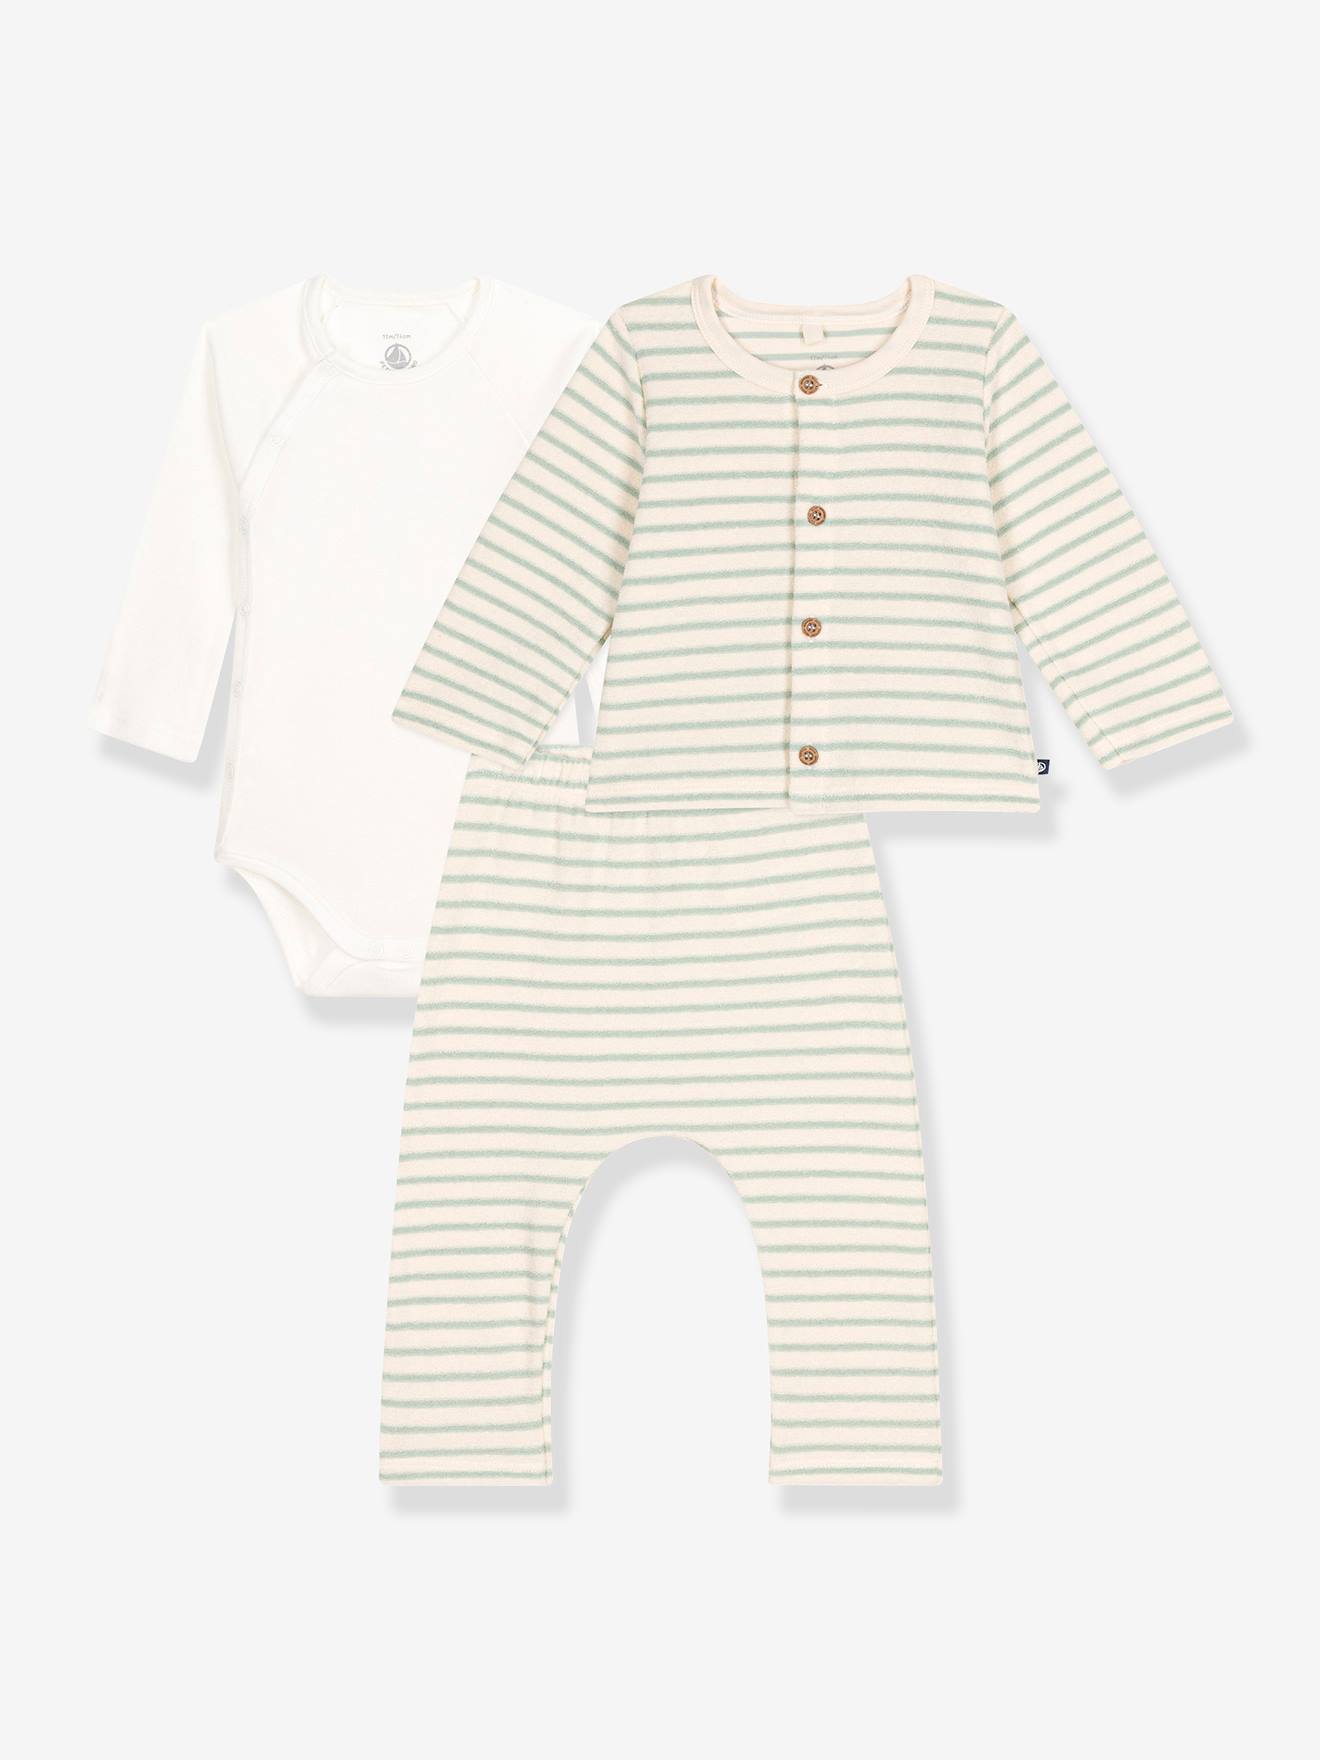 3-Piece Combo for Babies, by Petit Bateau striped green